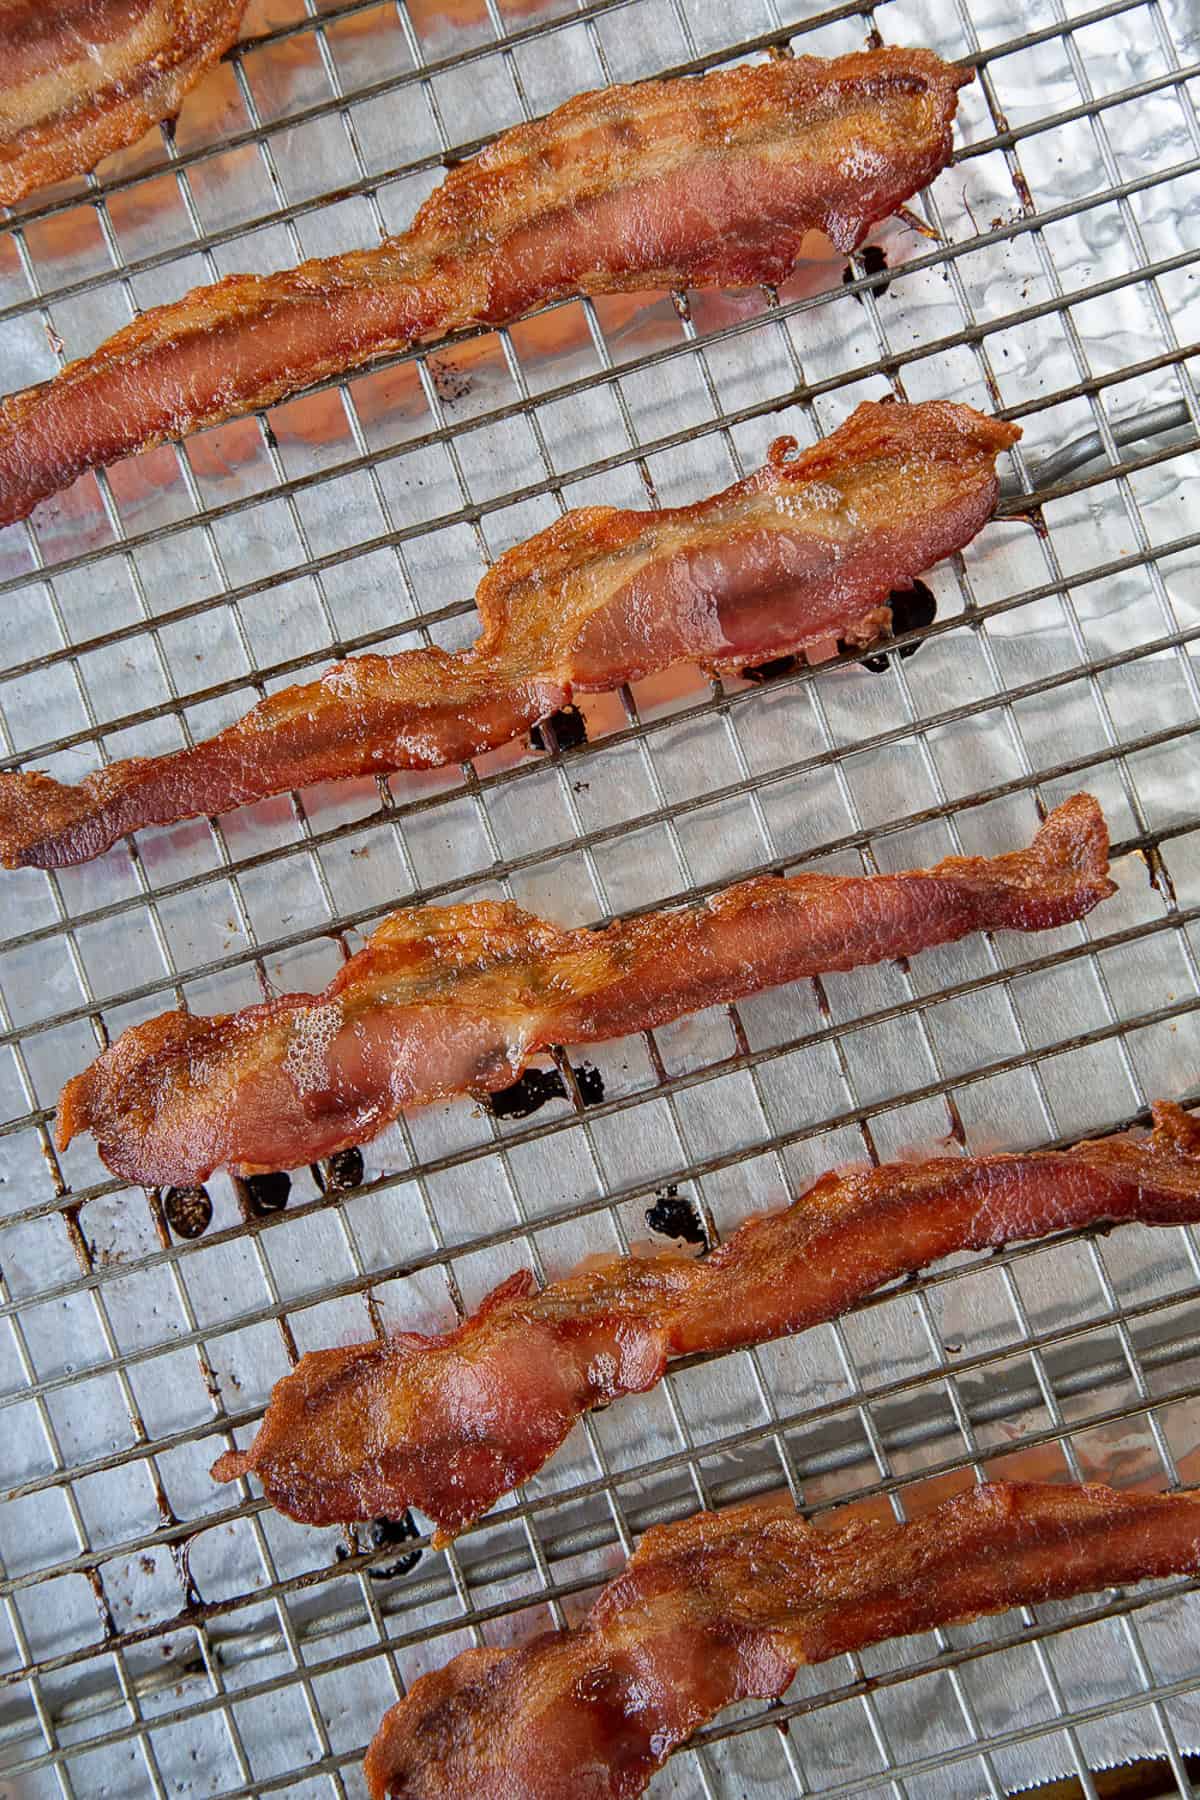 slices of cooked bacon on a wire rack.